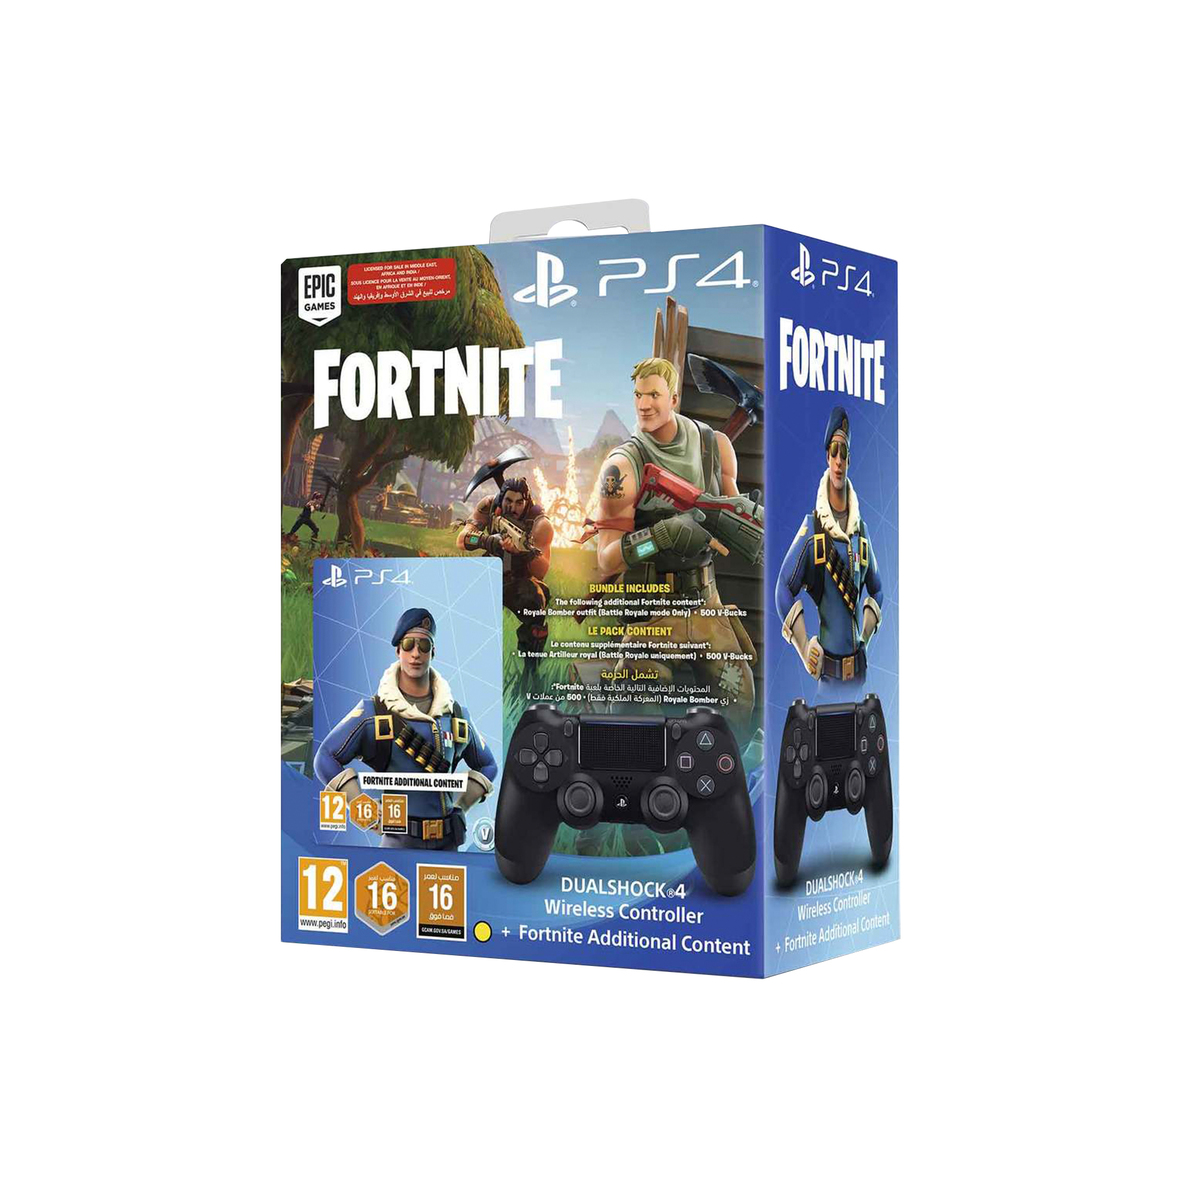 Sony DualShock 4 Wireless Controller for PlayStation 4 - Fornite Bonus Content Bundle